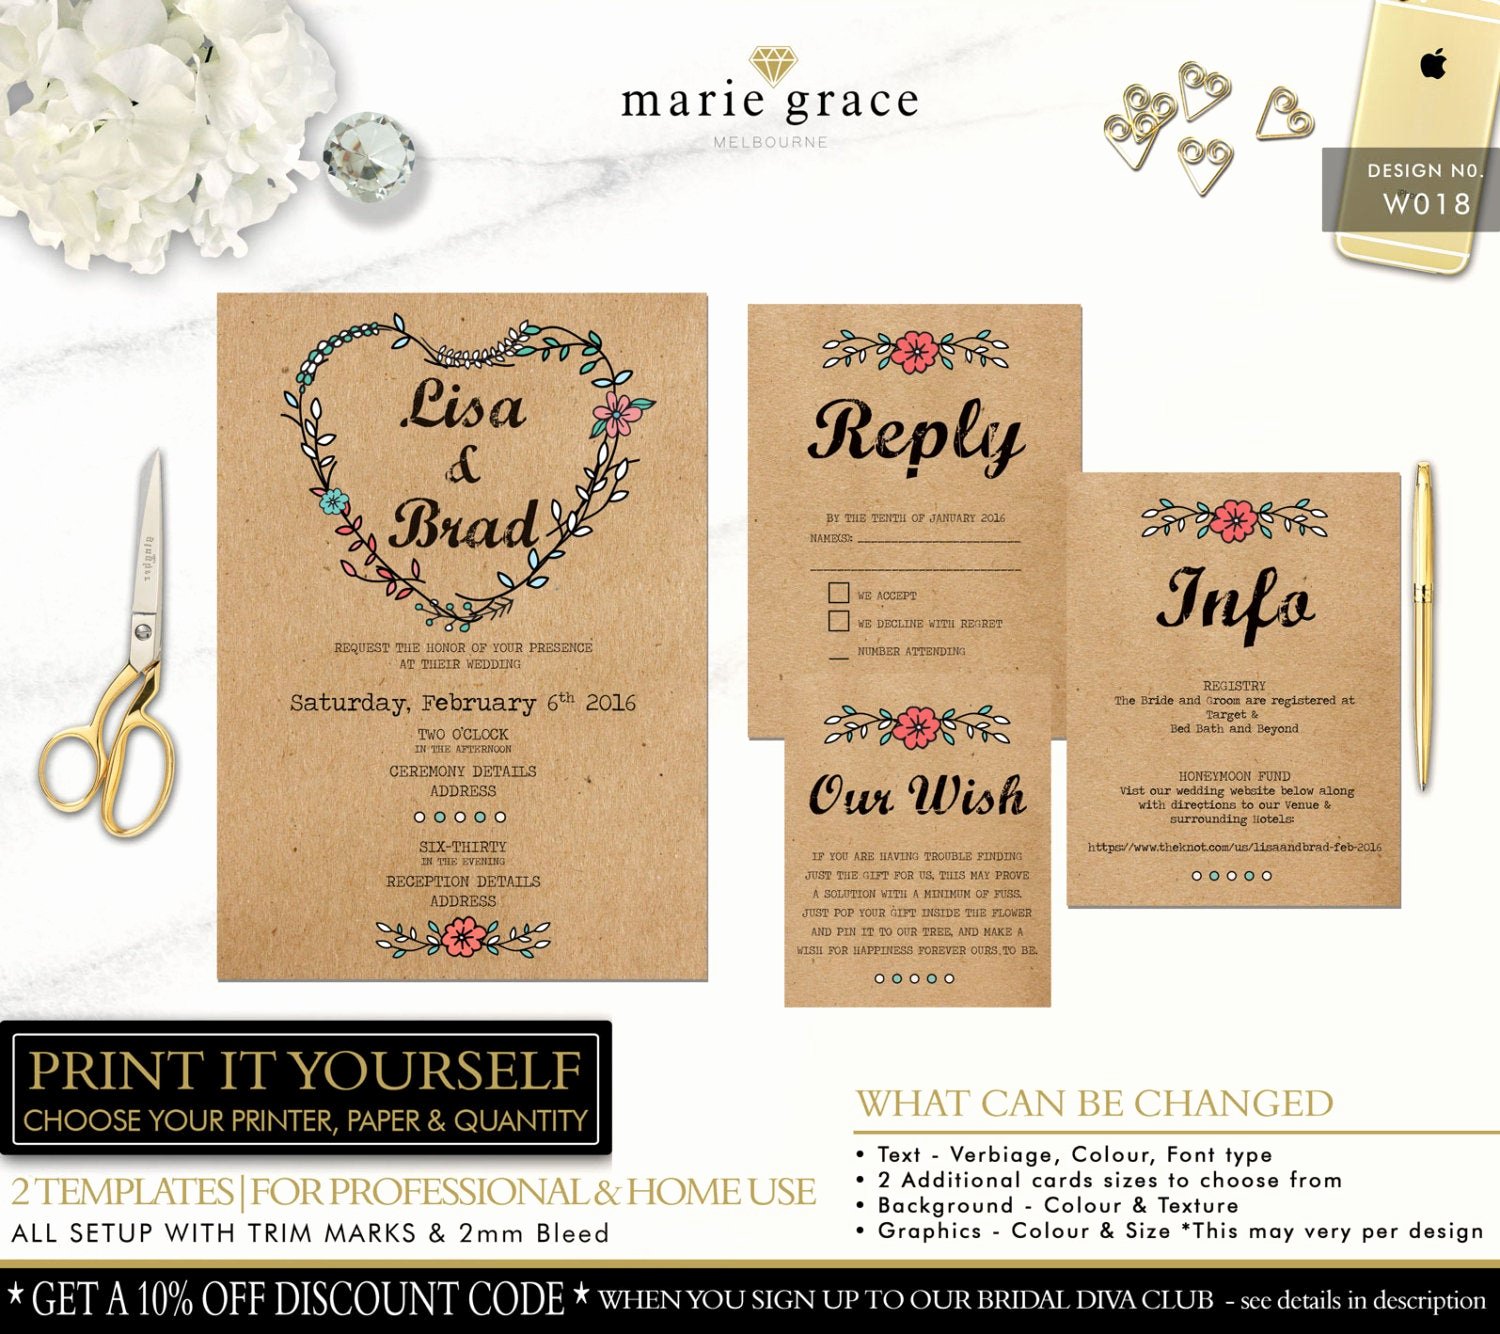 Rustic Wedding Invitations Template Awesome Wedding Invitation Templates Rustic Wedding Invitations